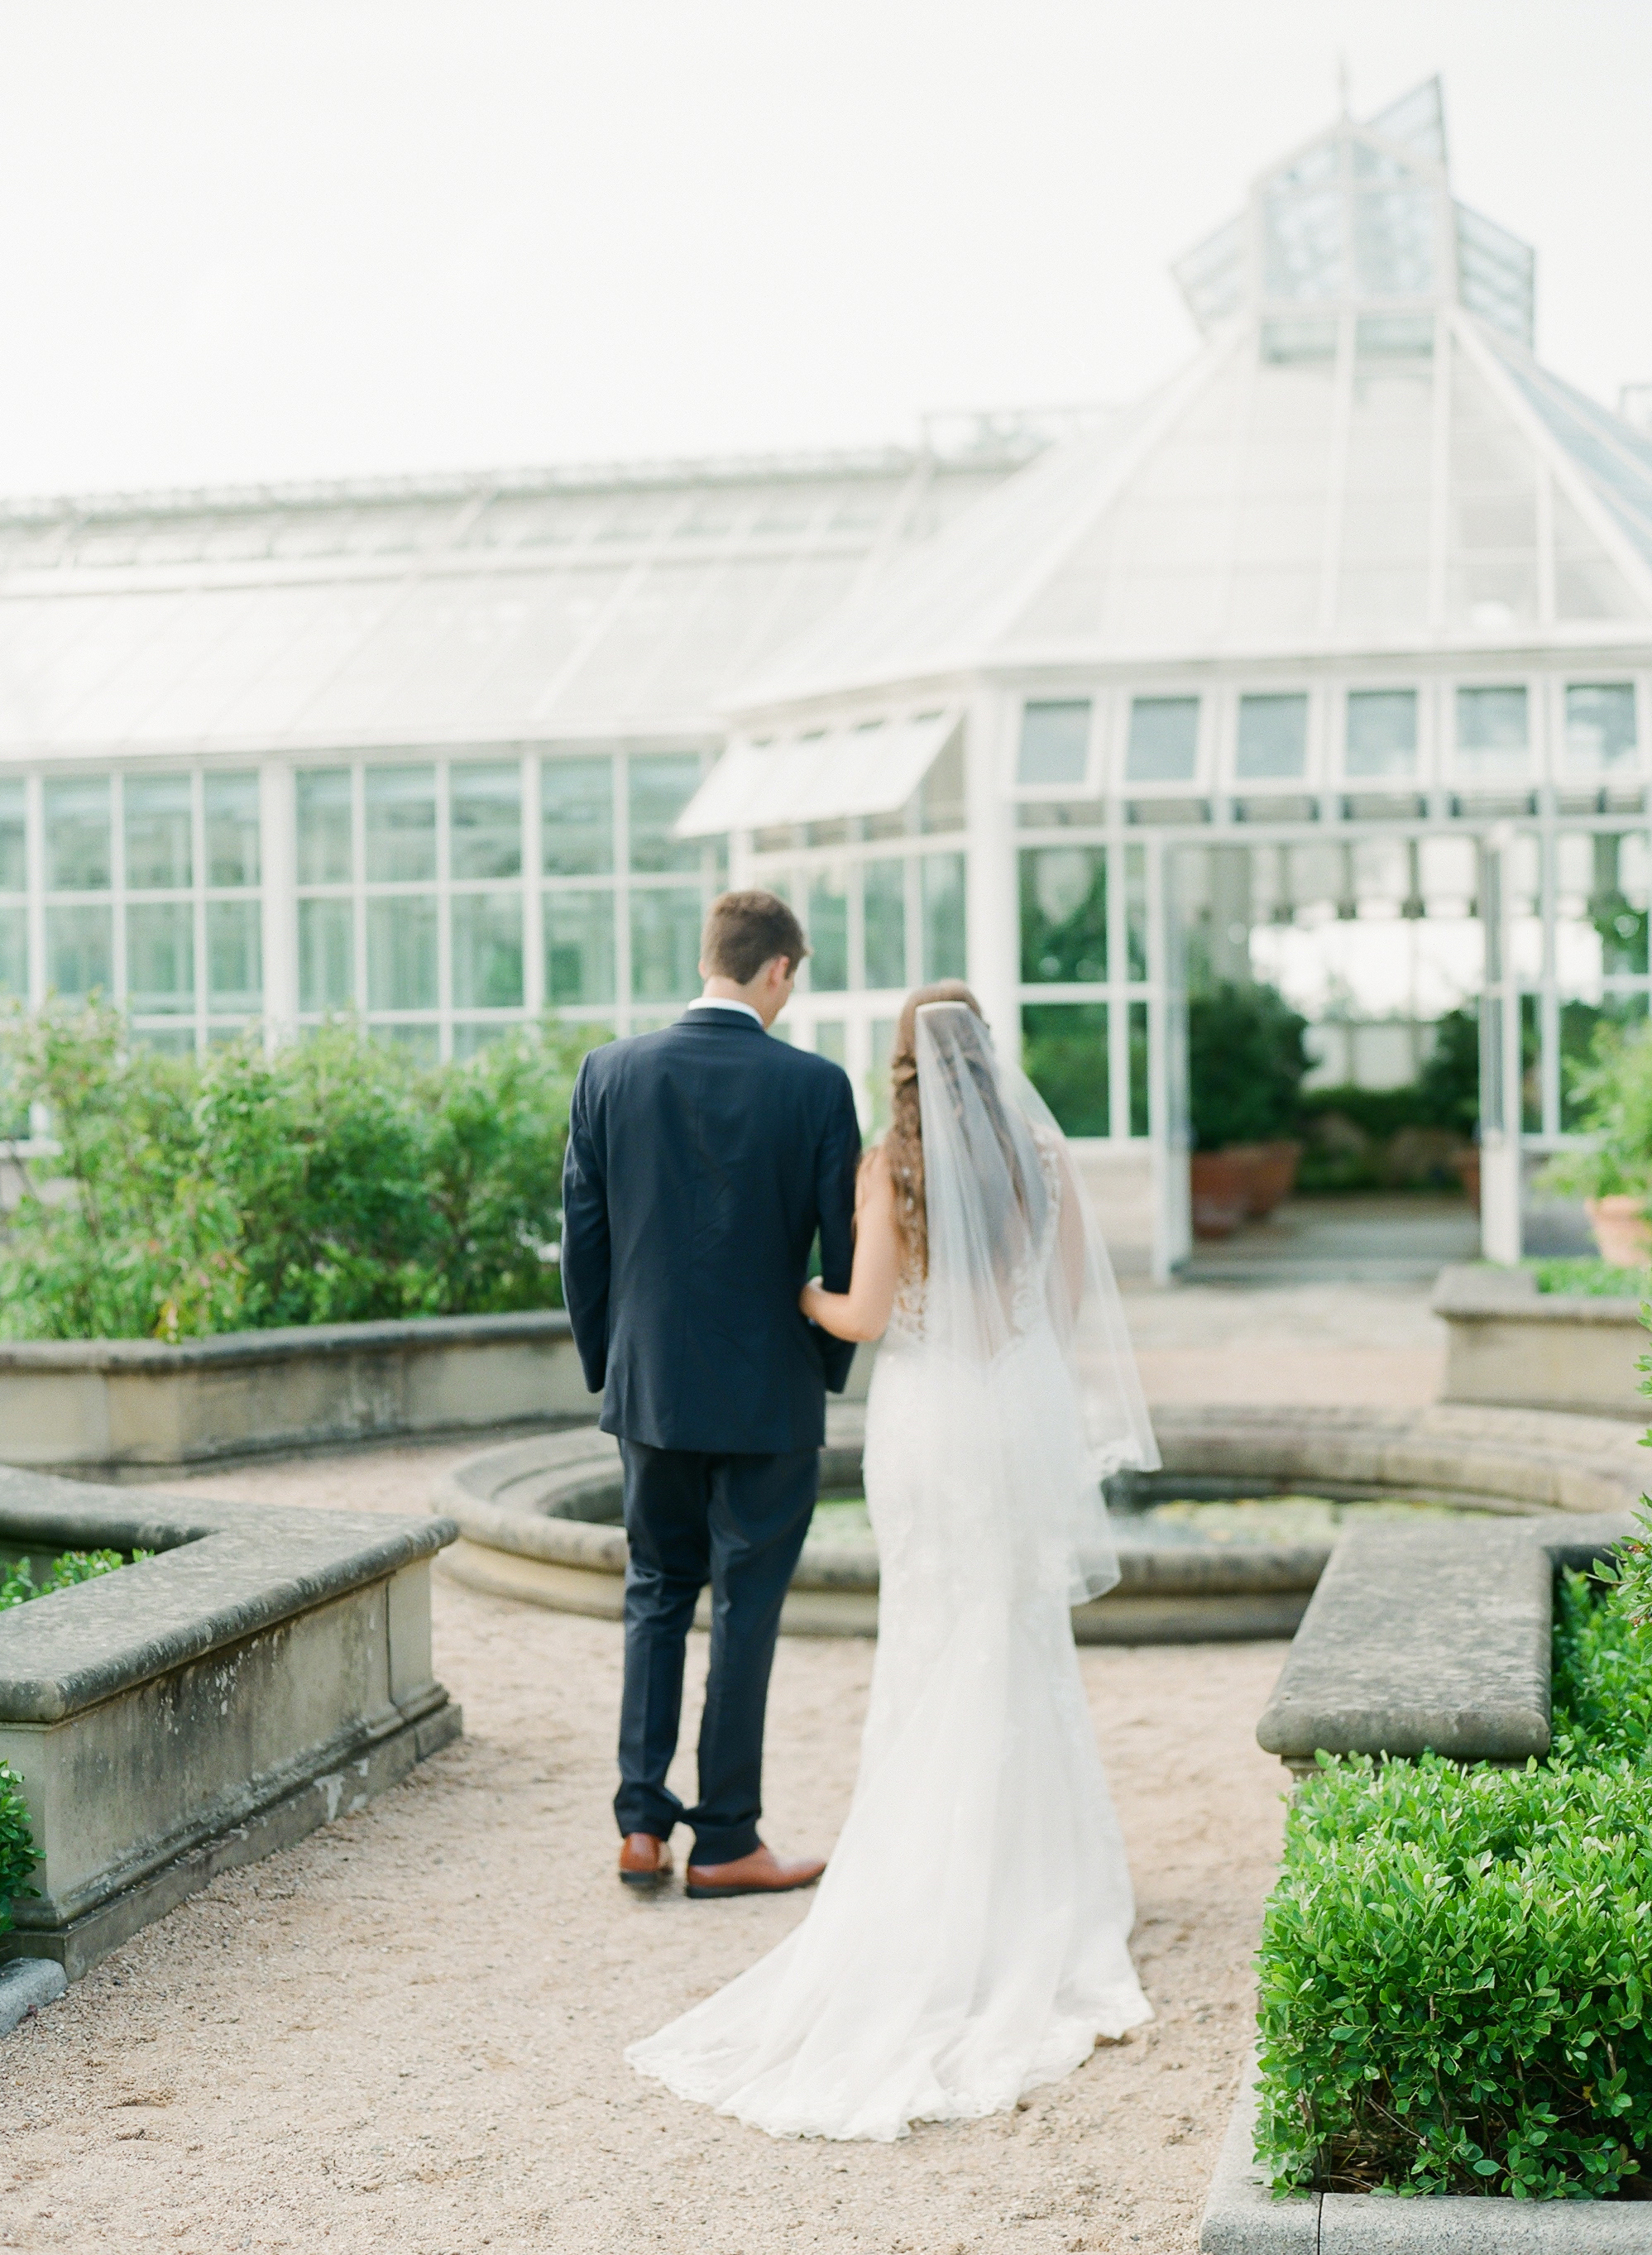 Halifax Wedding Photographer Jacqueline Anne Photography captures Newcombe Farmers Wedding in the Harriet Irving Gardens